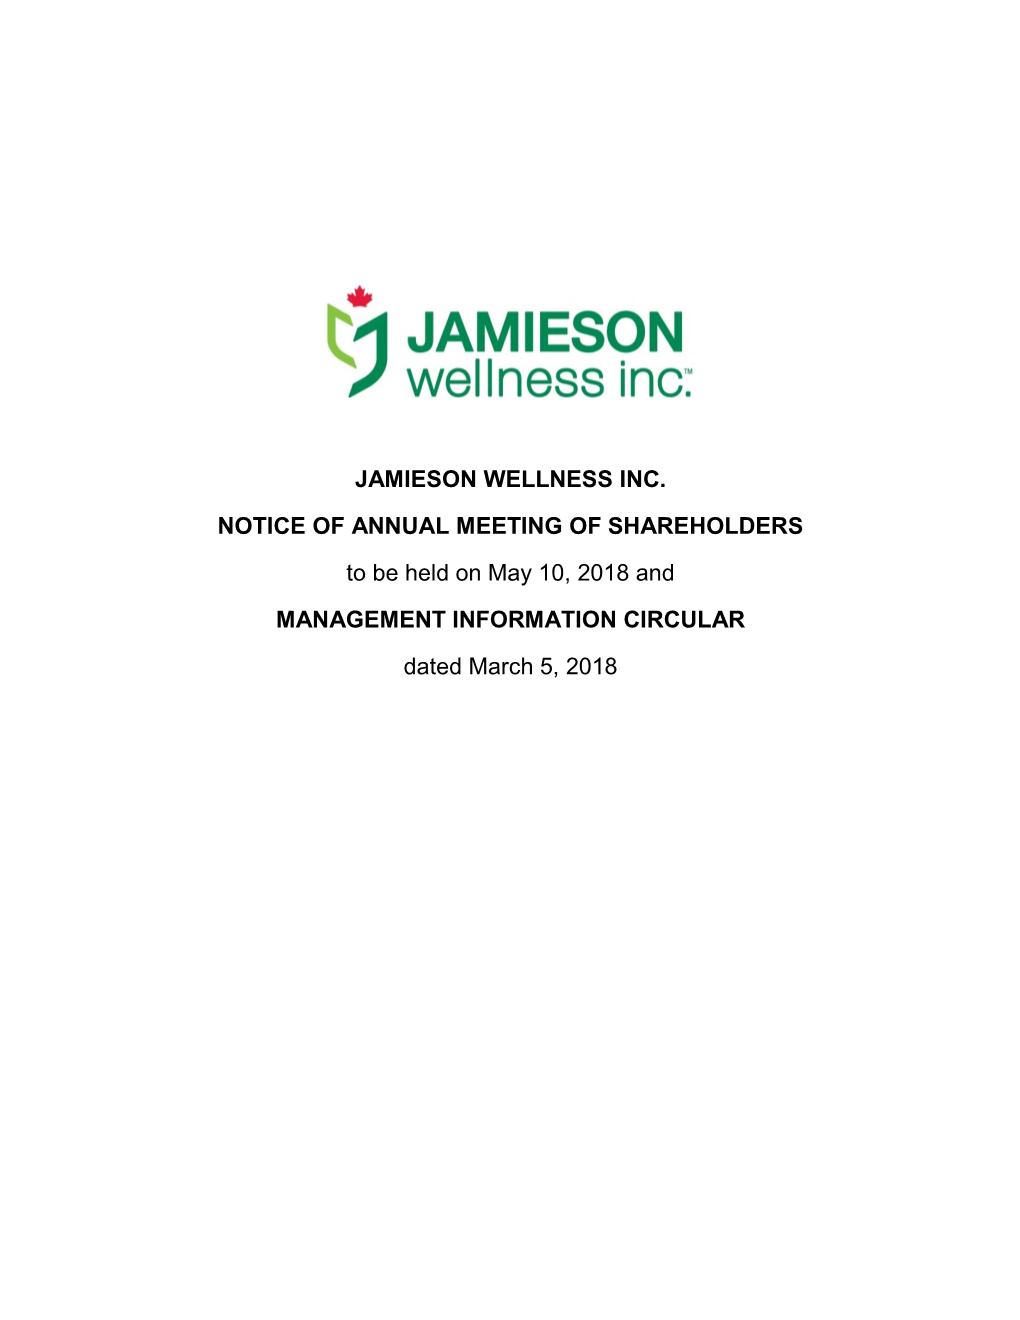 Jamieson Wellness Inc. Notice of Annual Meeting of Shareholders to Be Held on May 10, 2018